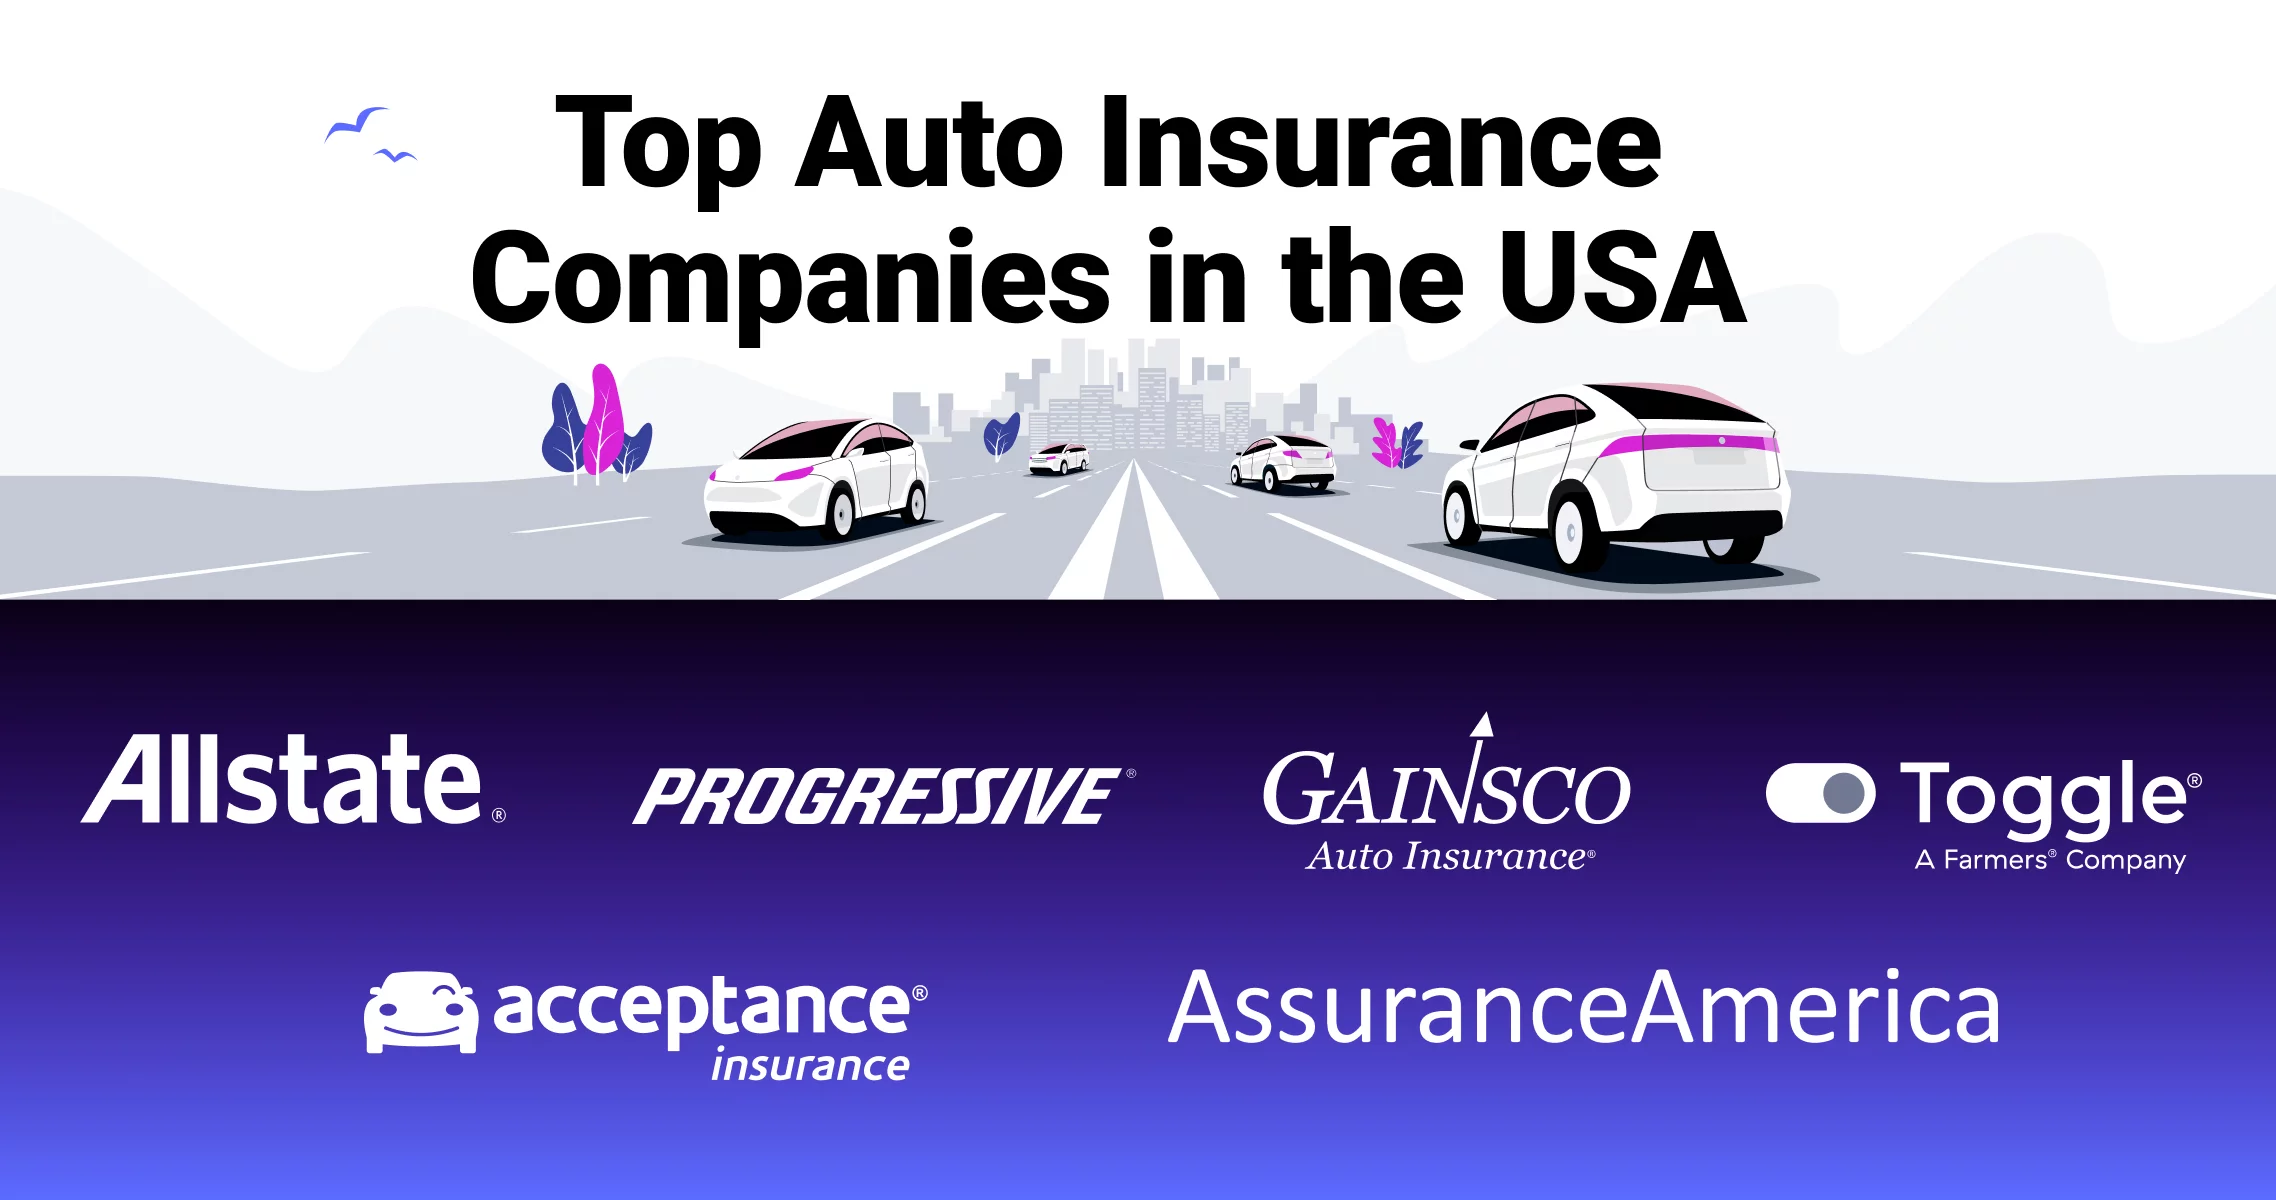 Top Auto Insurance Companies In the USA For 2023